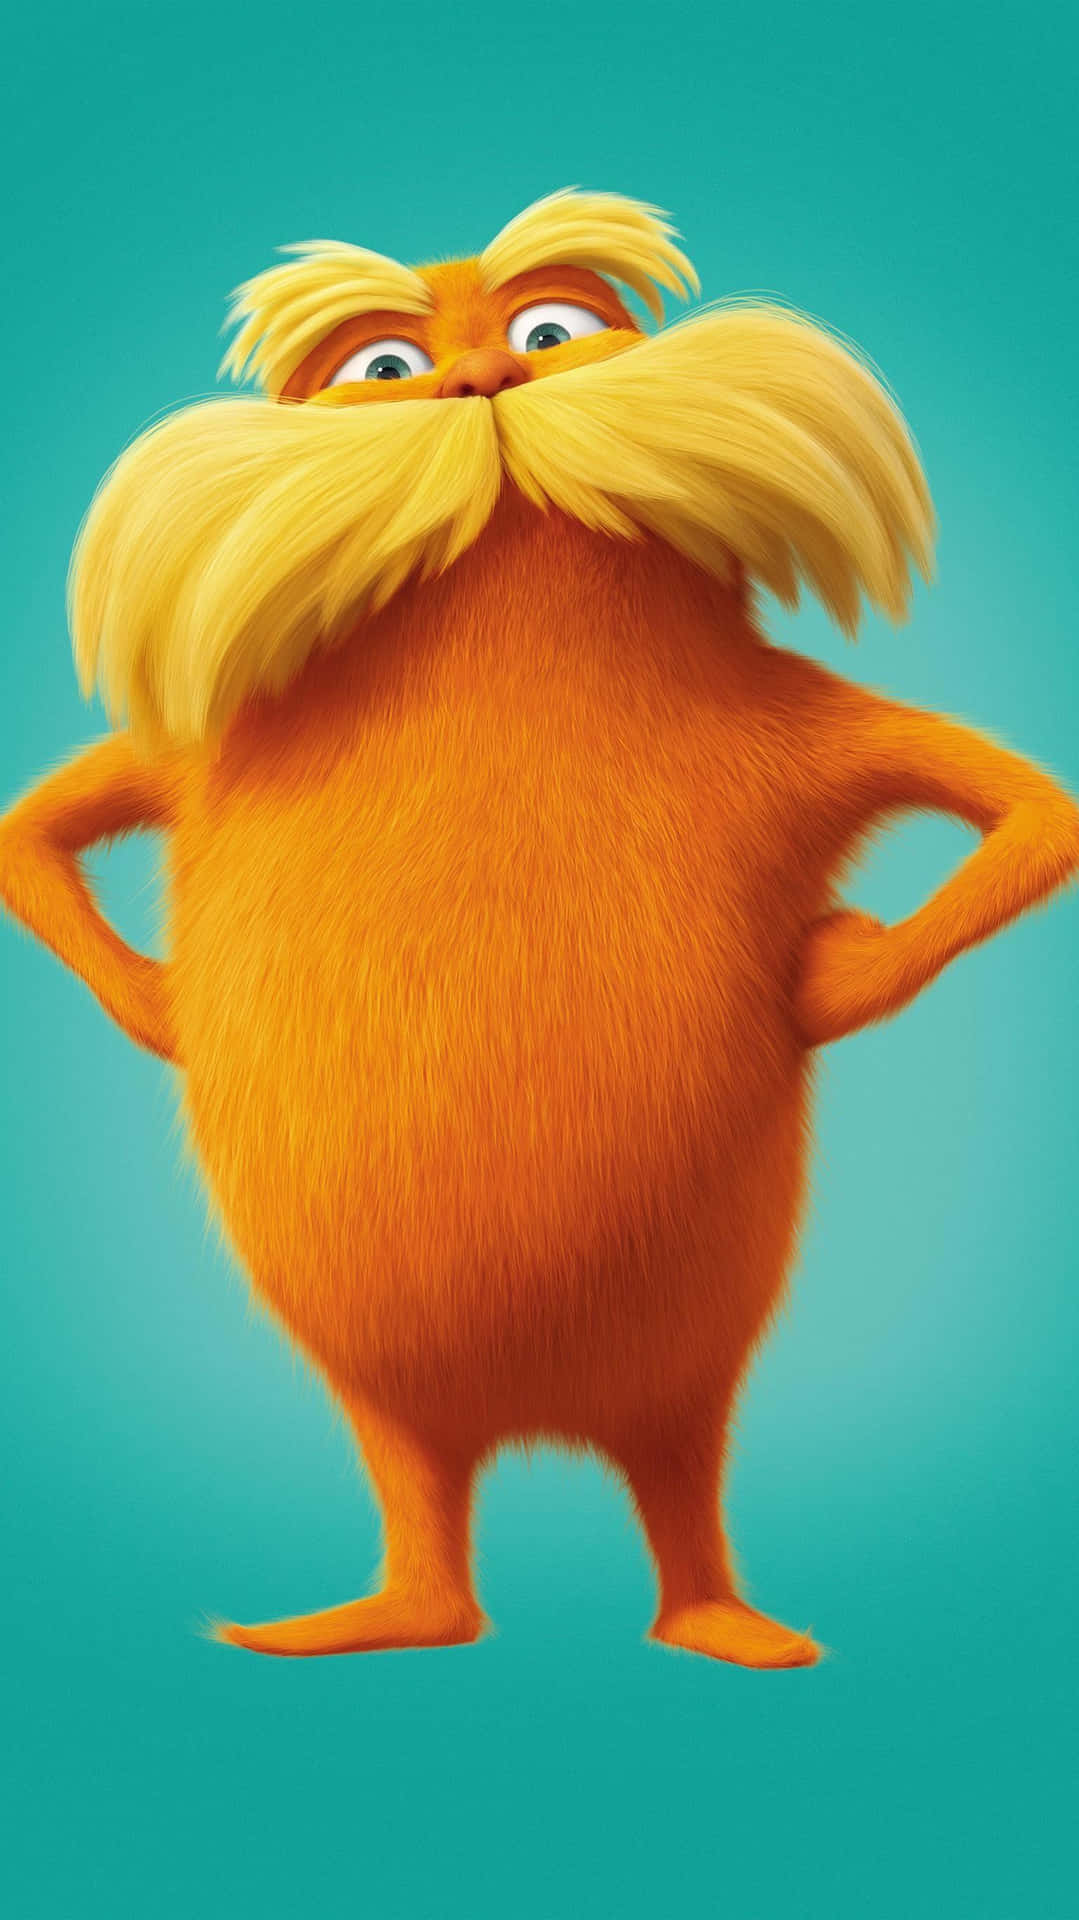 The Lorax Standing Proud